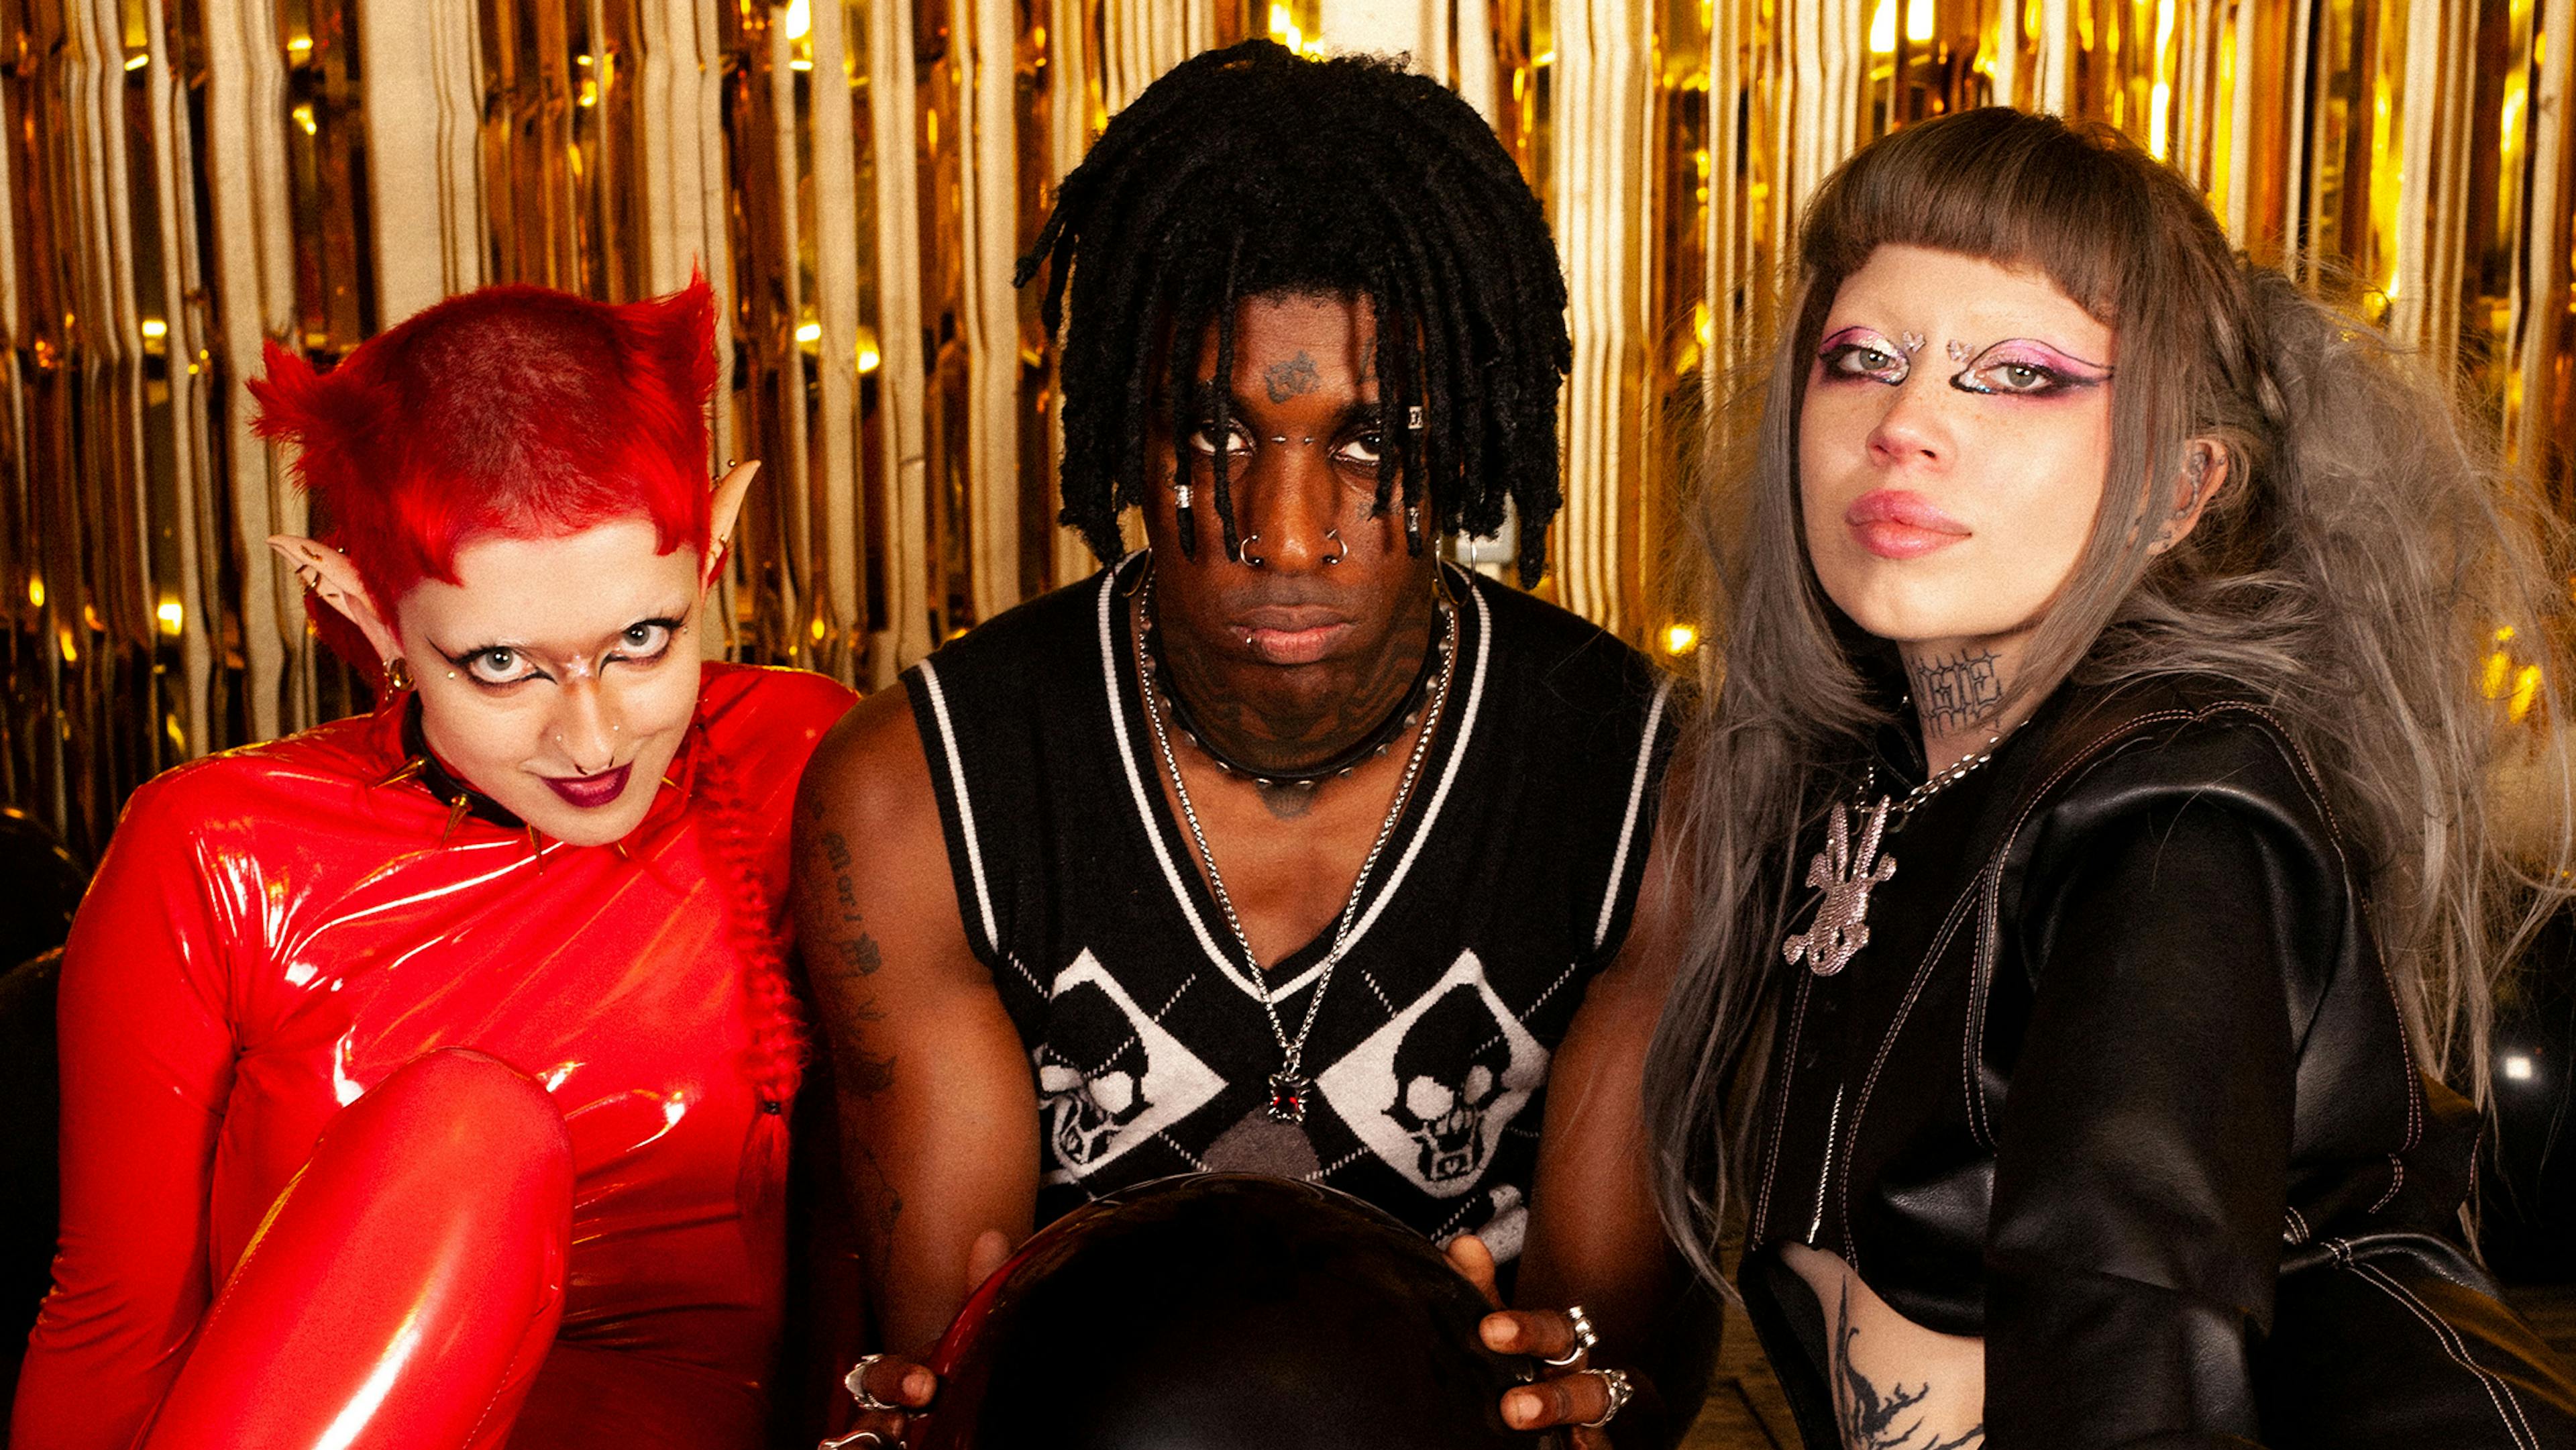 Jazmin Bean, Deijuvhs and Cody Frost are redefining what it means to be alternative